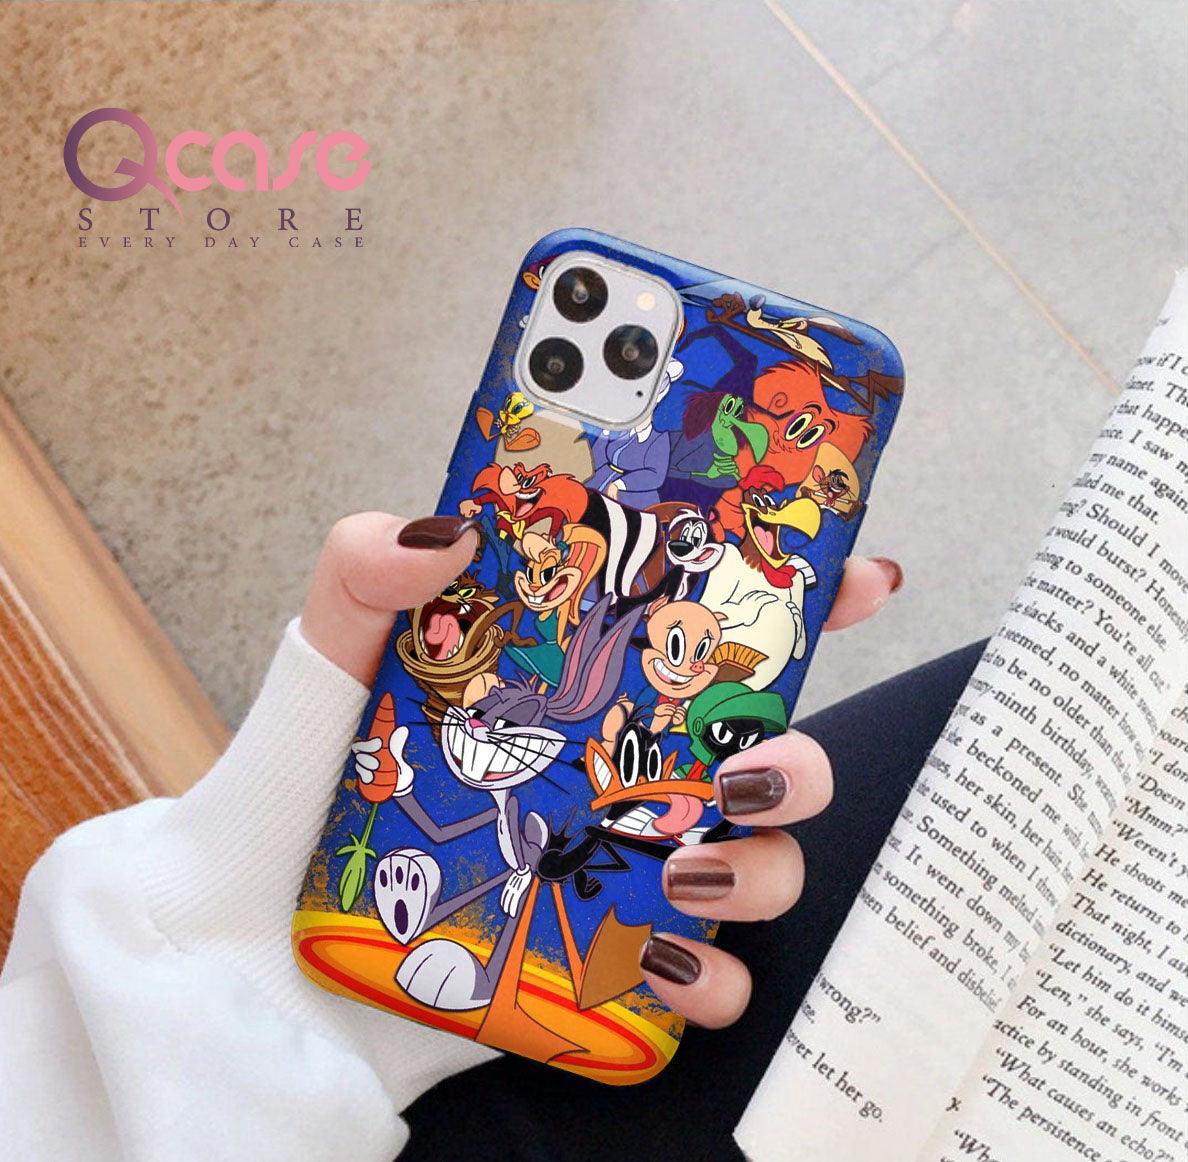 Blue Bugs Bunny's Phone Cover - Qcase Store | Everyday Case